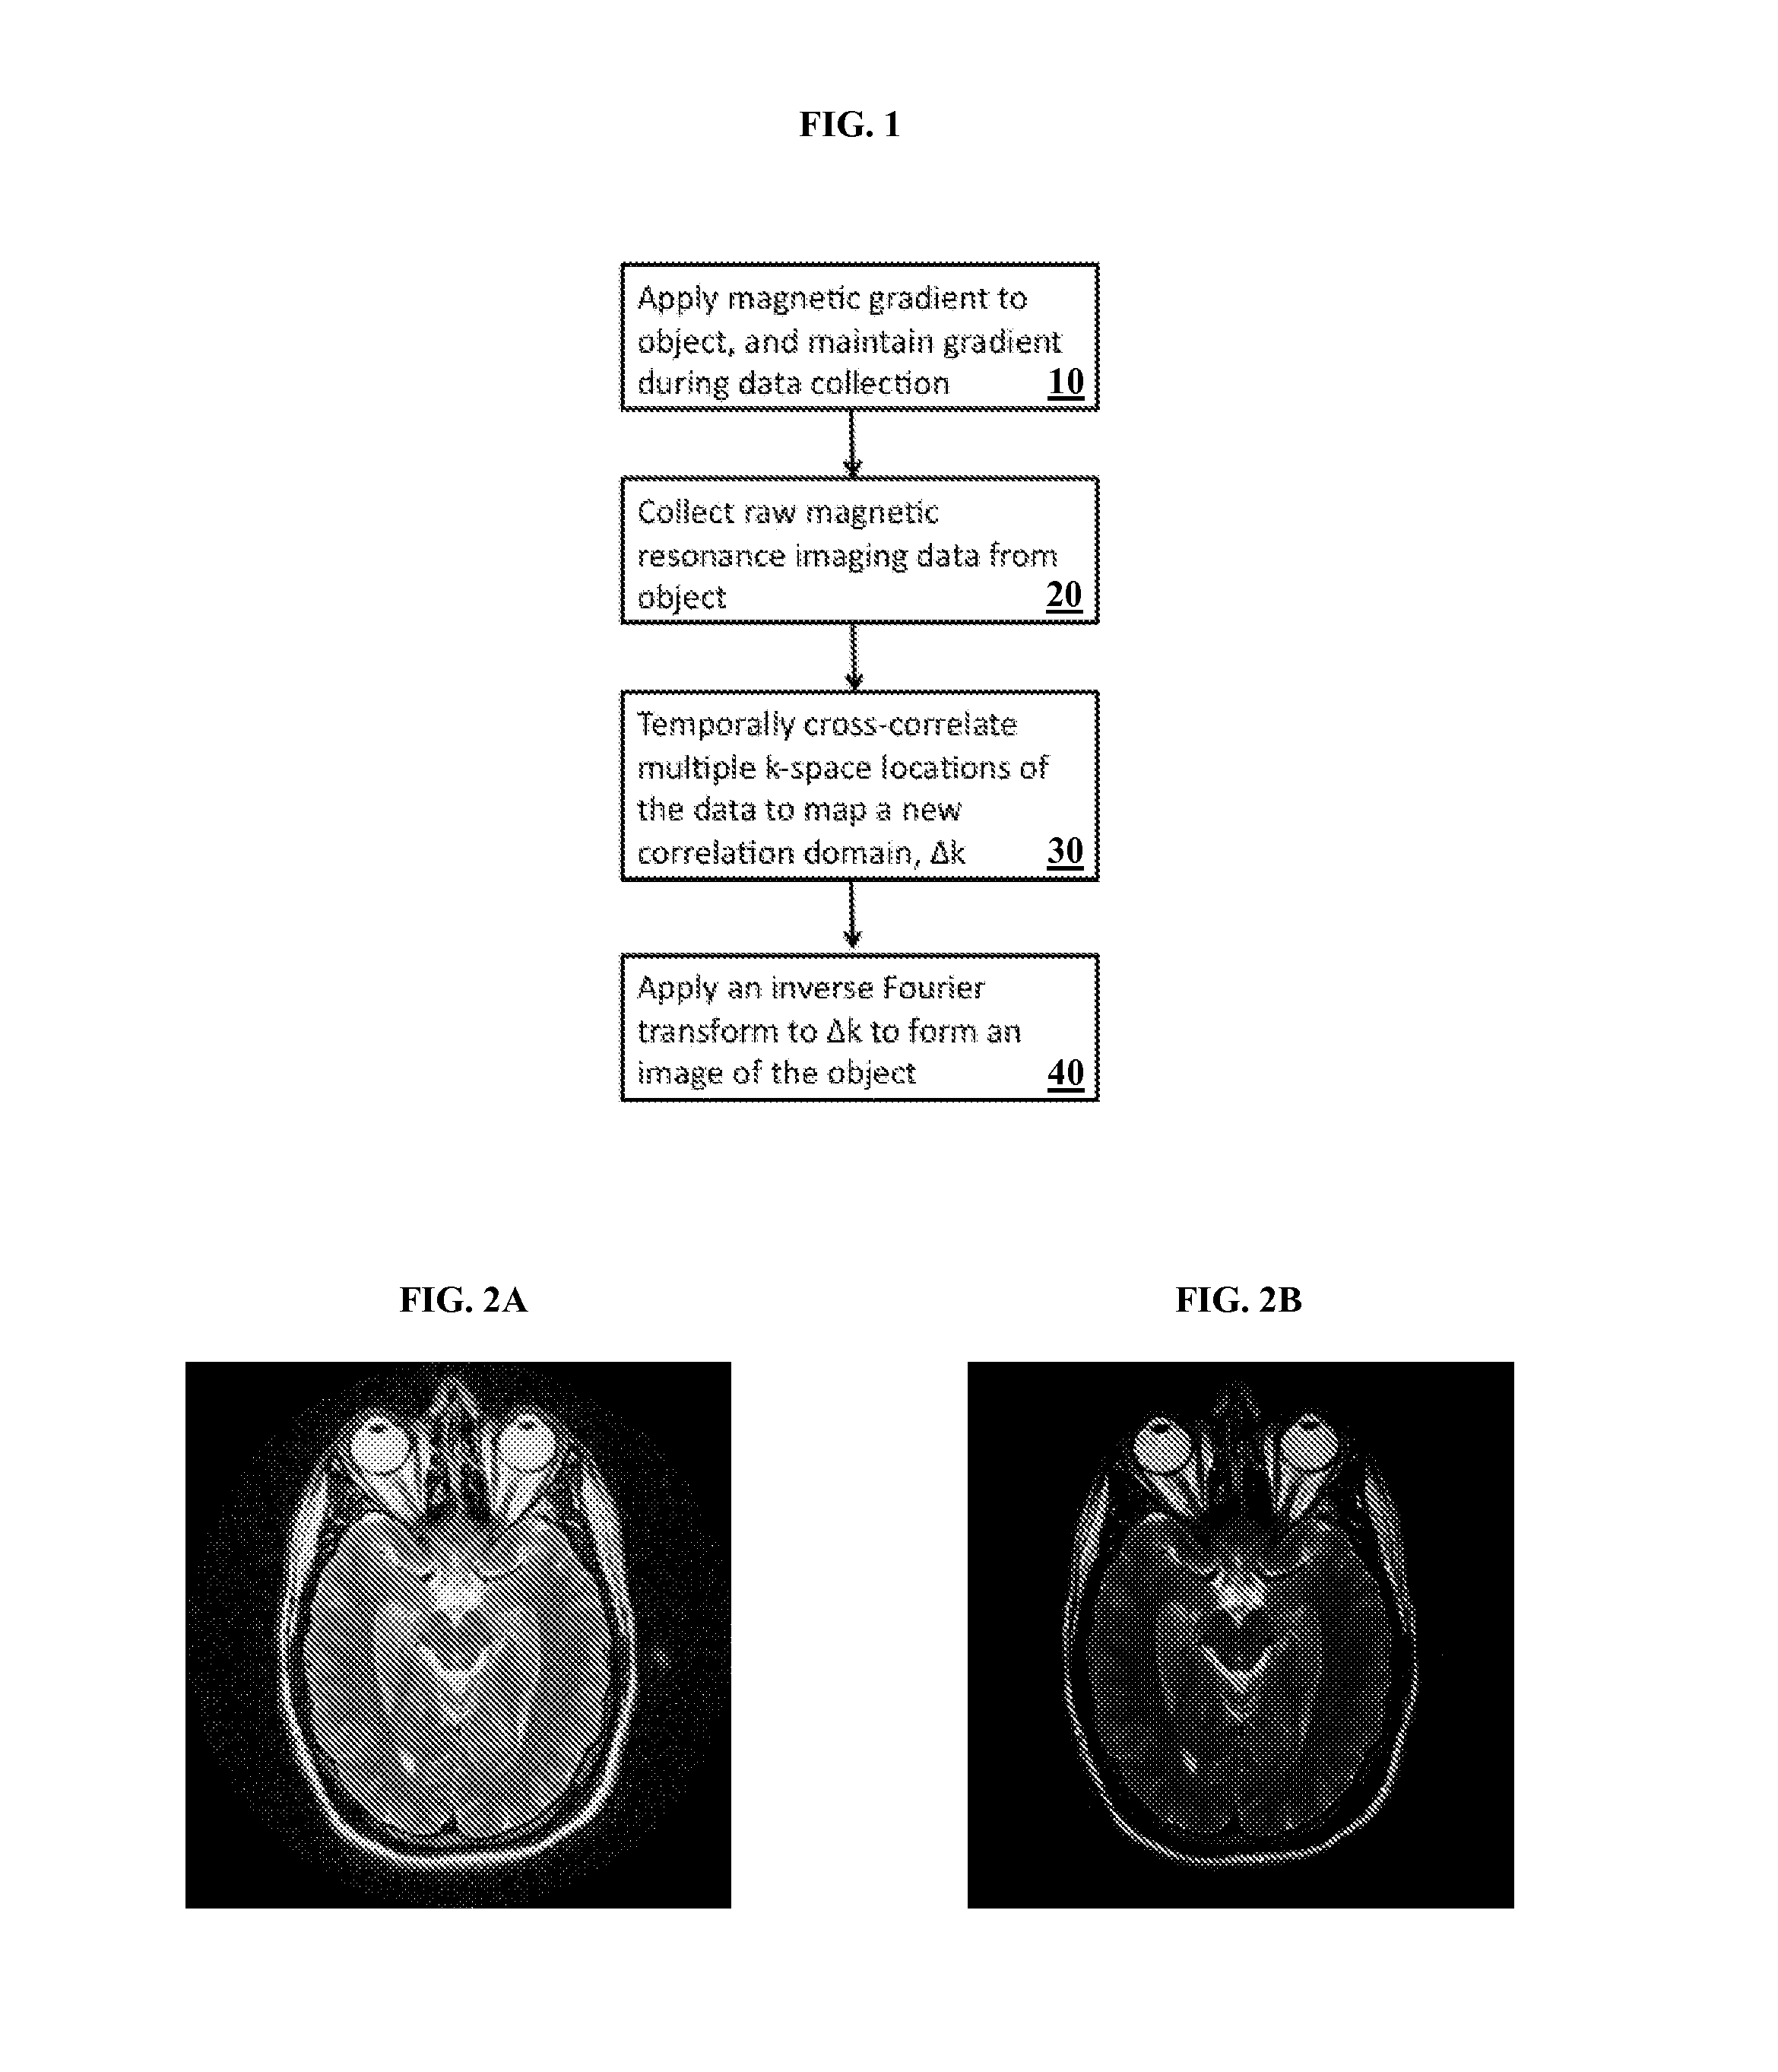 Interferometric Magnetic Resonance Imaging System and Related Method